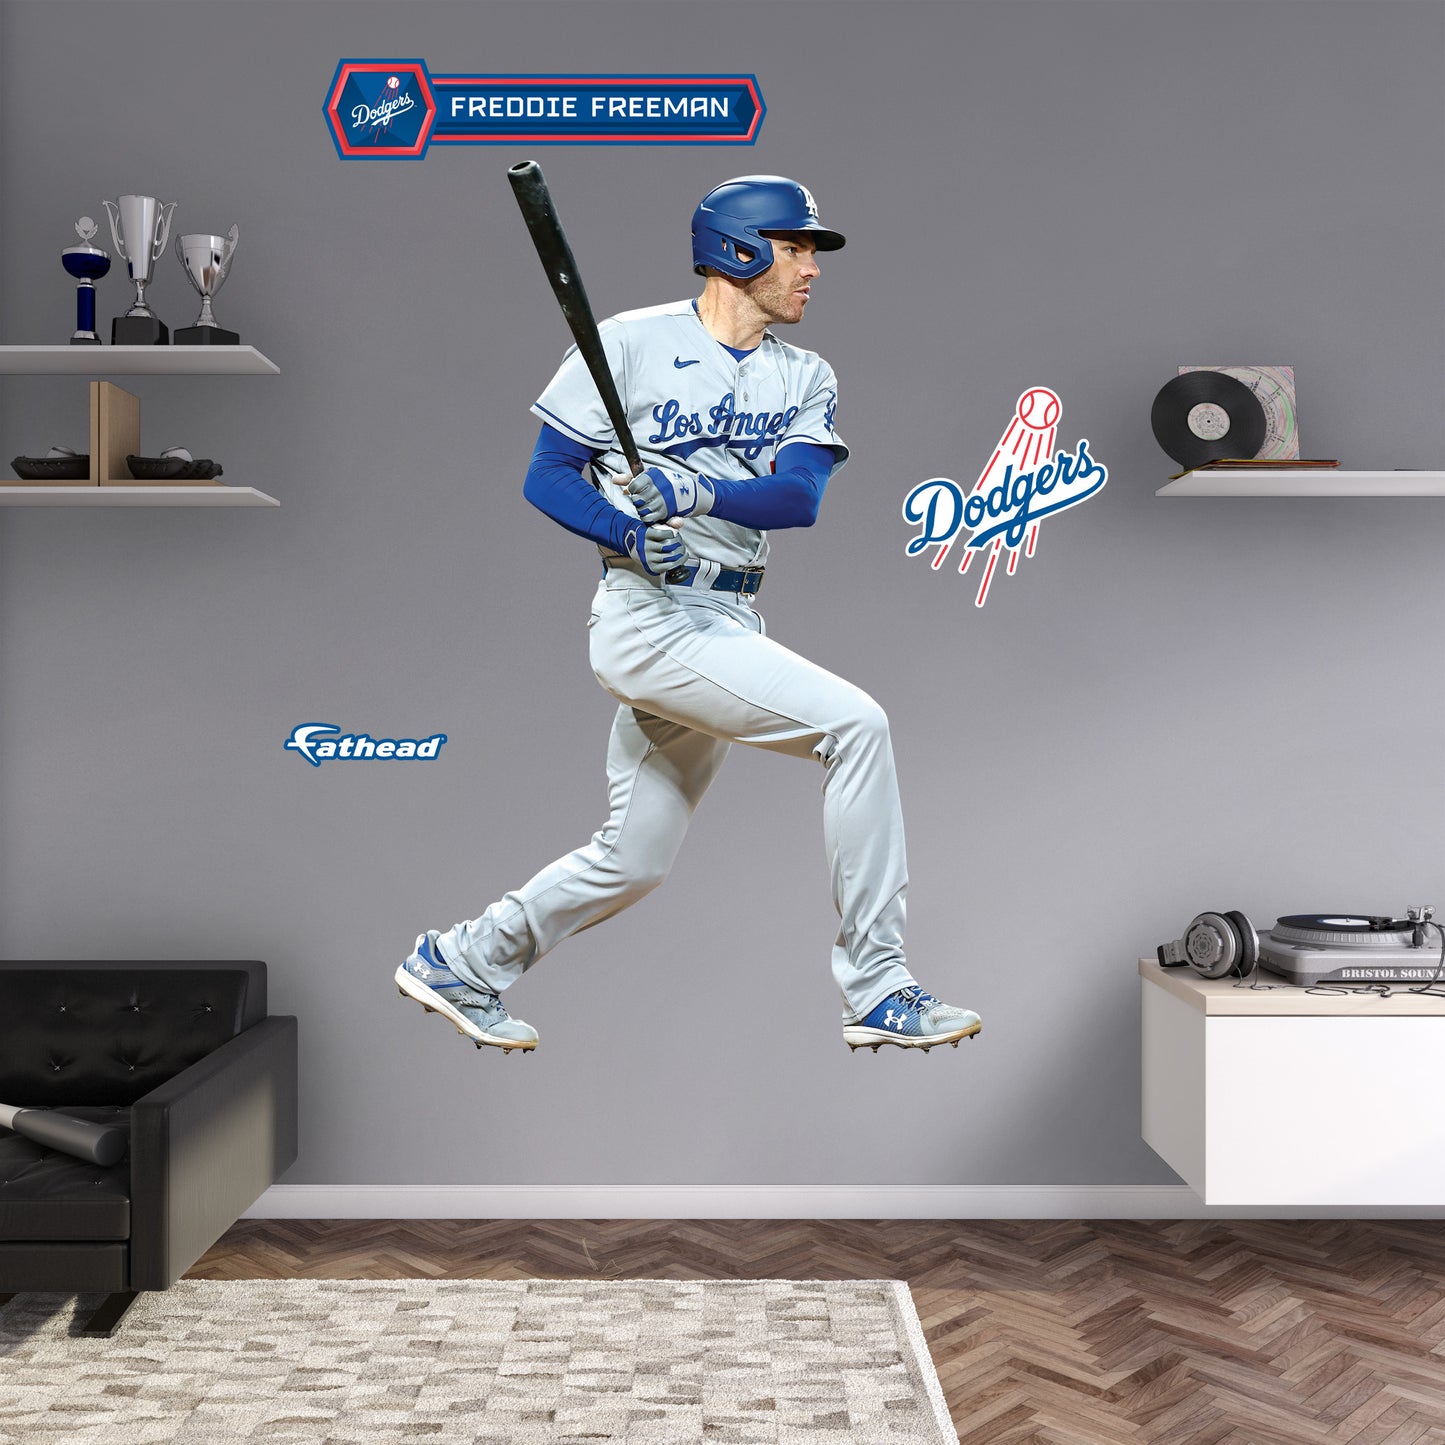 Los Angeles Dodgers: Freddie Freeman 2022 - Officially Licensed MLB  Removable Adhesive Decal